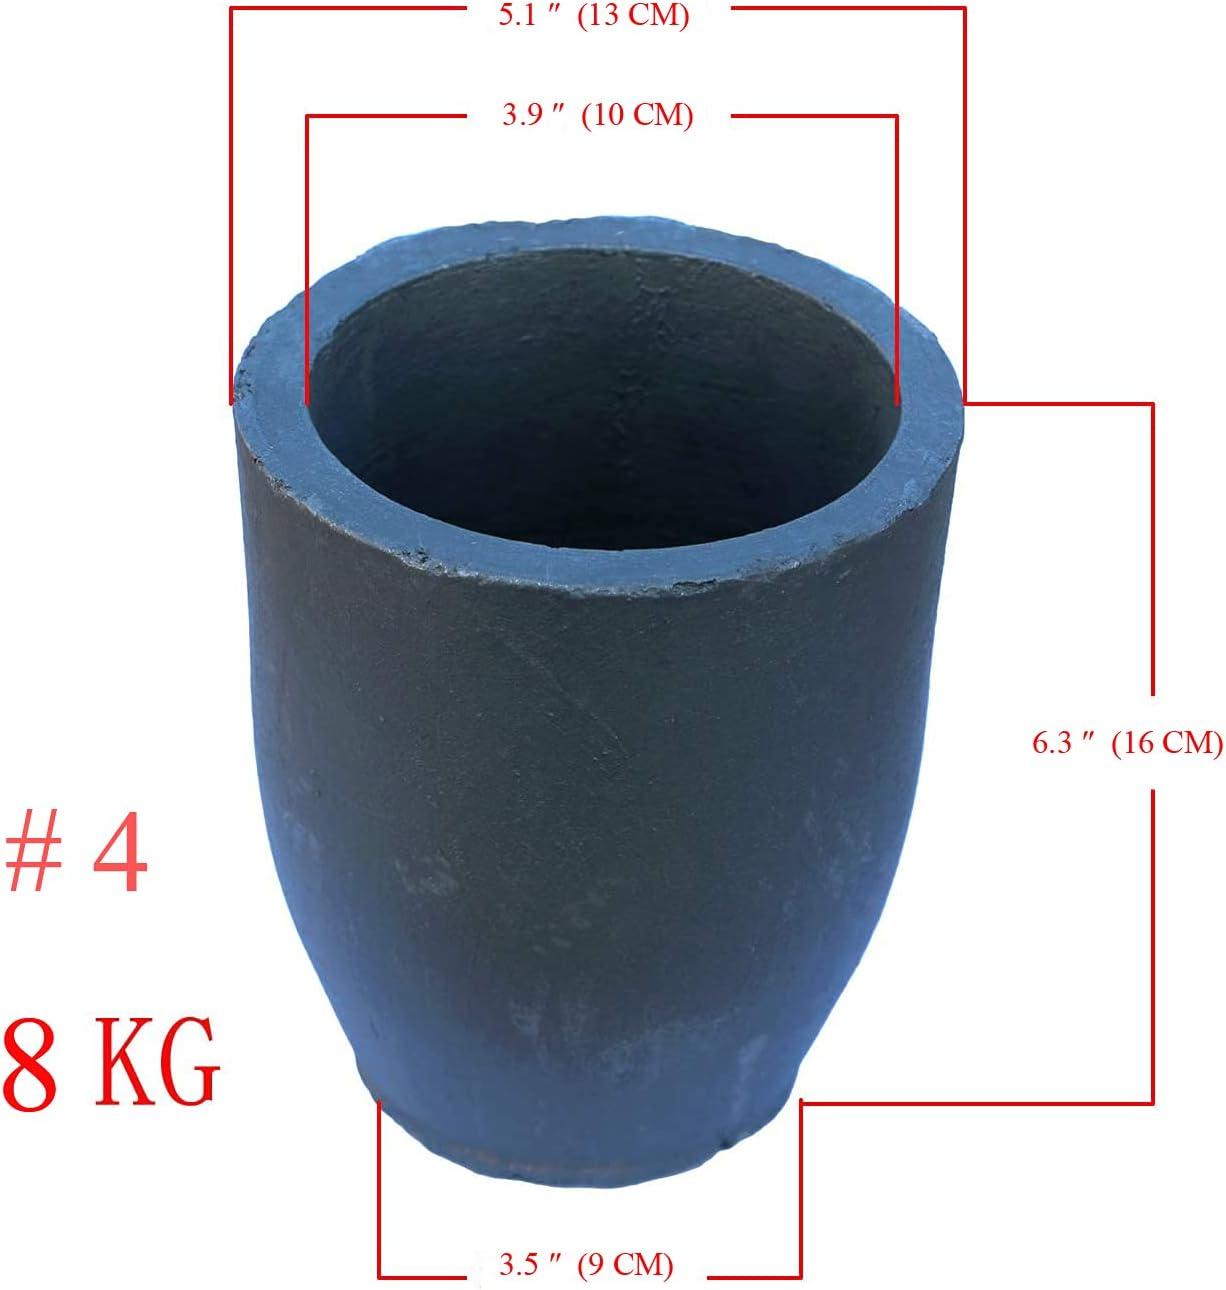 8KG Foundry Clay Graphite Crucibles,Crucibles for Melting Metal,Melting  Casting Refining Aluminum Gold Silver Copper,The High Temperature  1800(3272F)